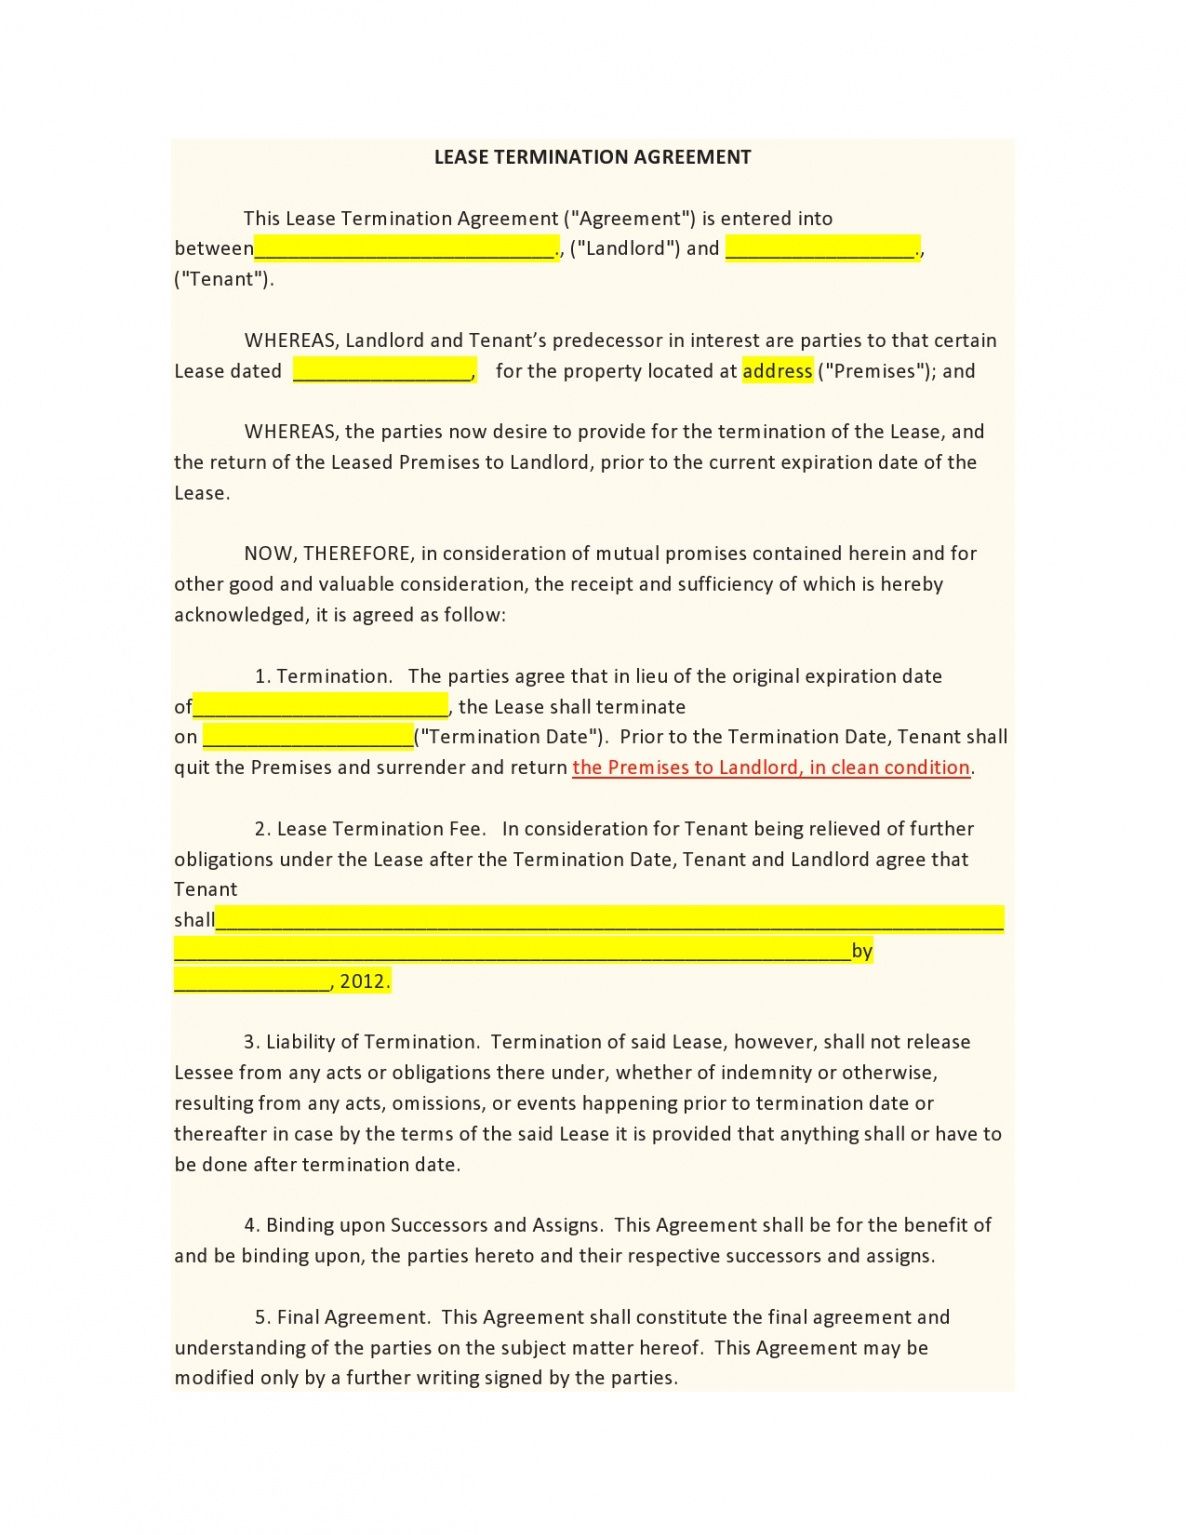 Professional Contract Termination Agreement And Release Template  Sample